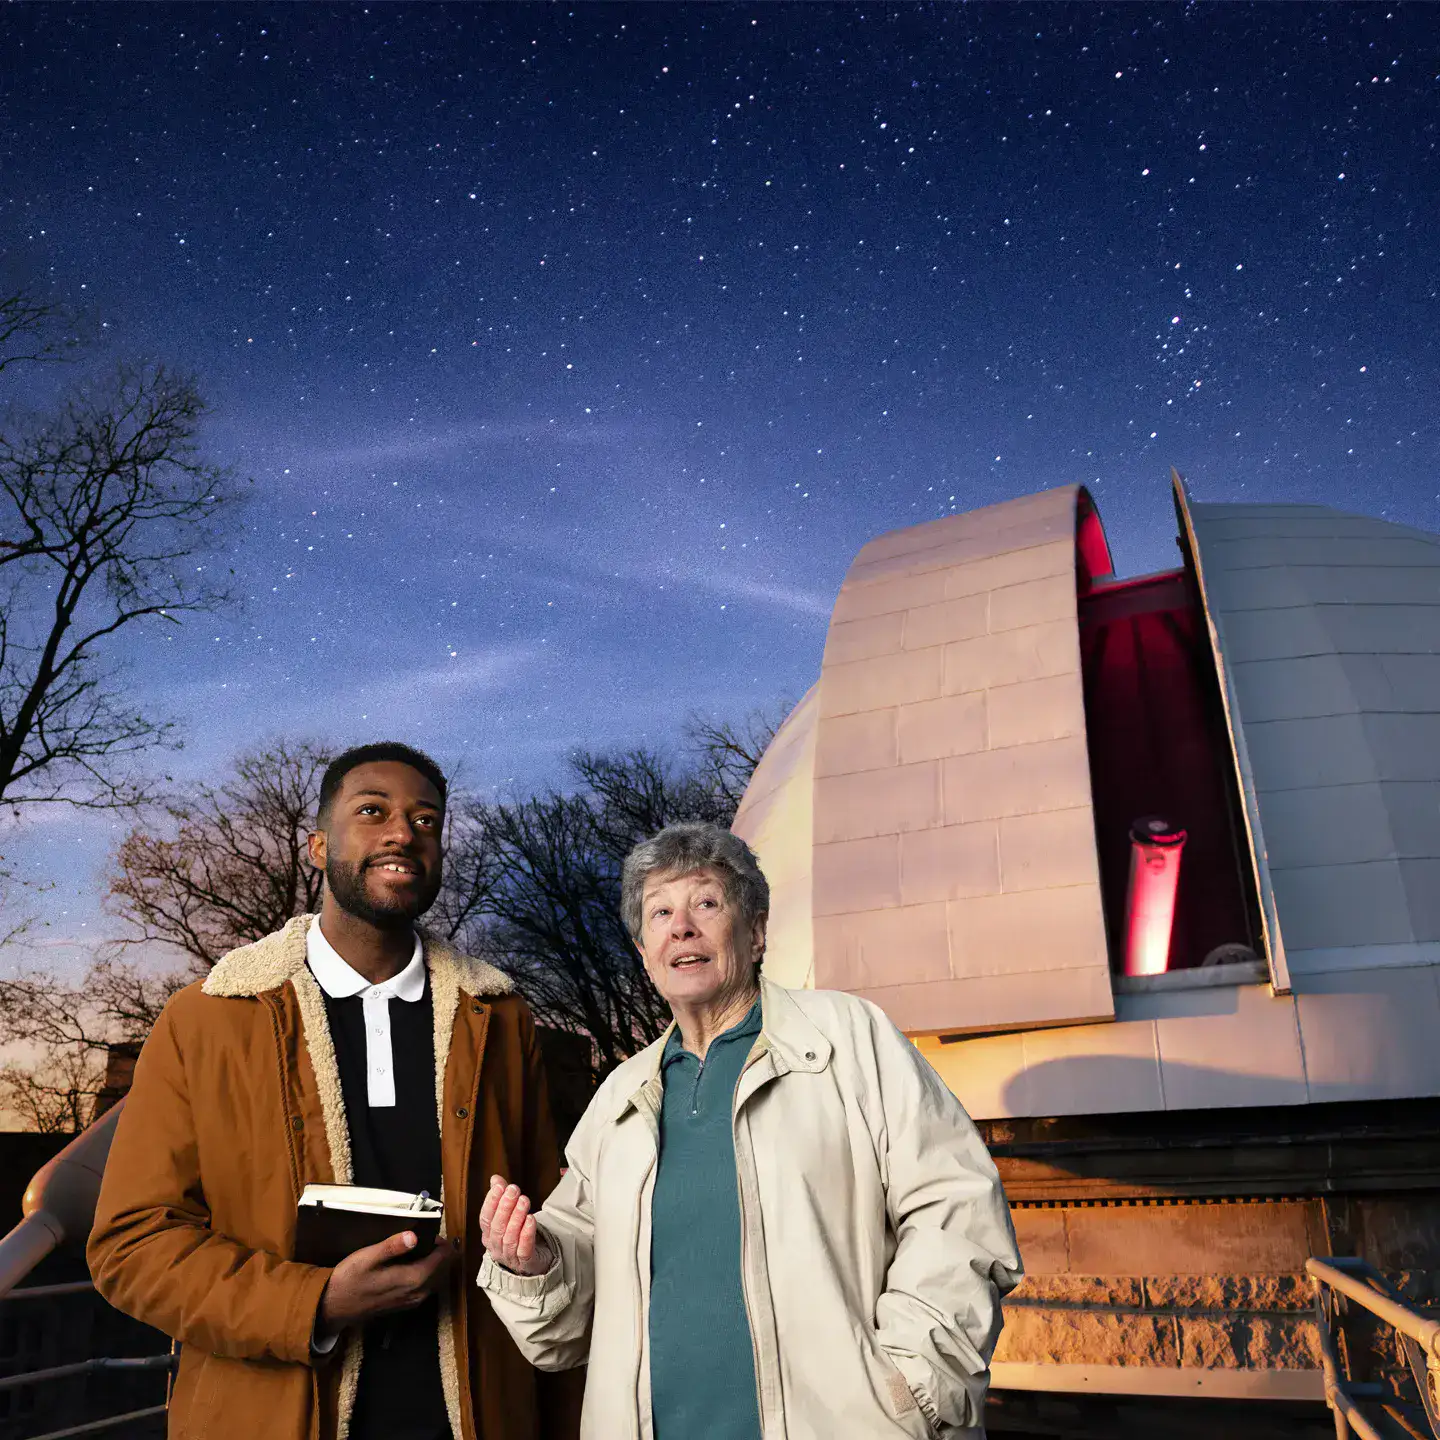 An astronomy professor and her student stand outside in front of an observatory discussing the night sky.